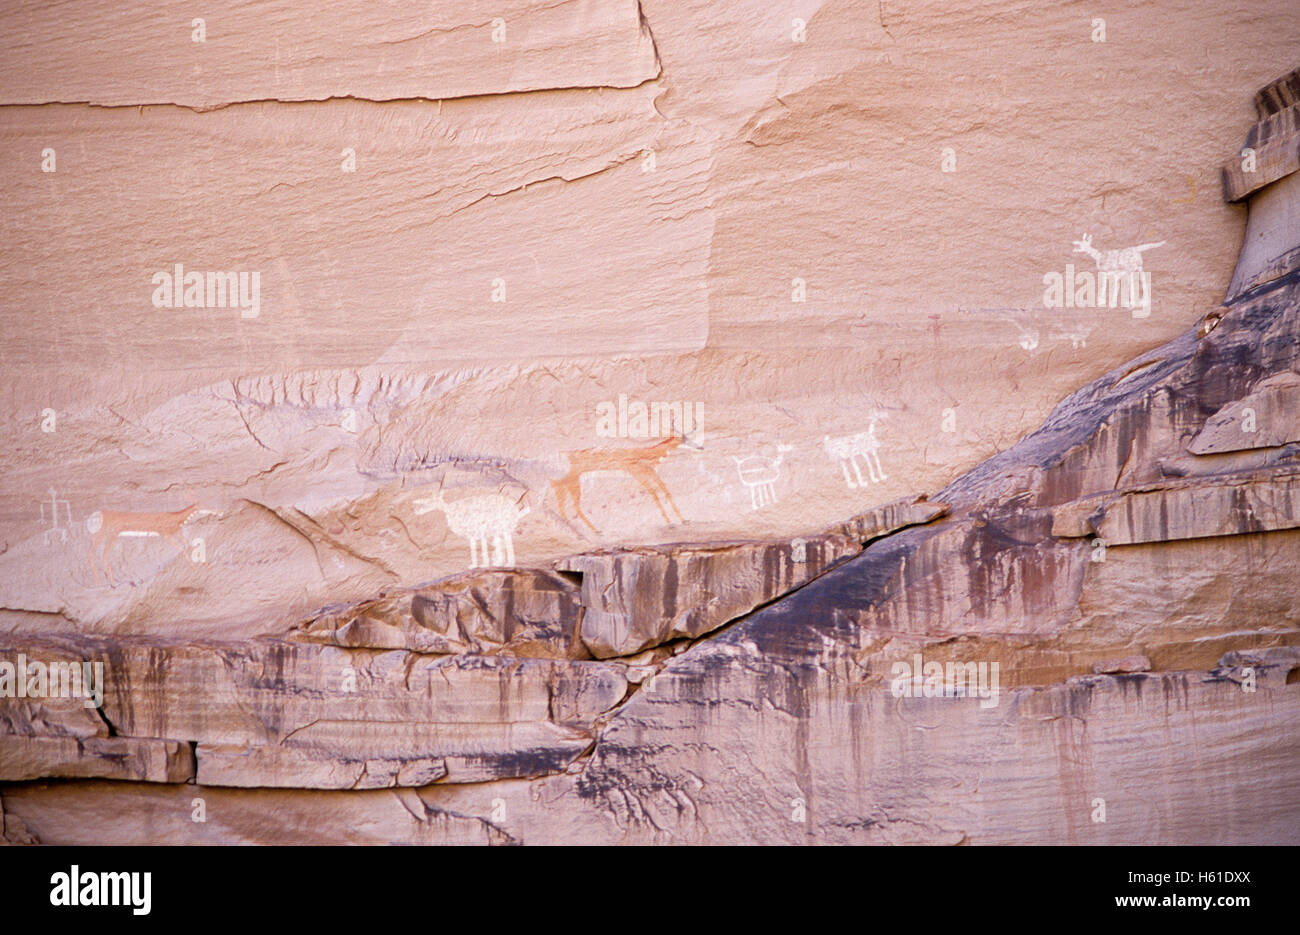 Rock art on cliff walls at Canyon de Chelly National Monument, Arizona Stock Photo